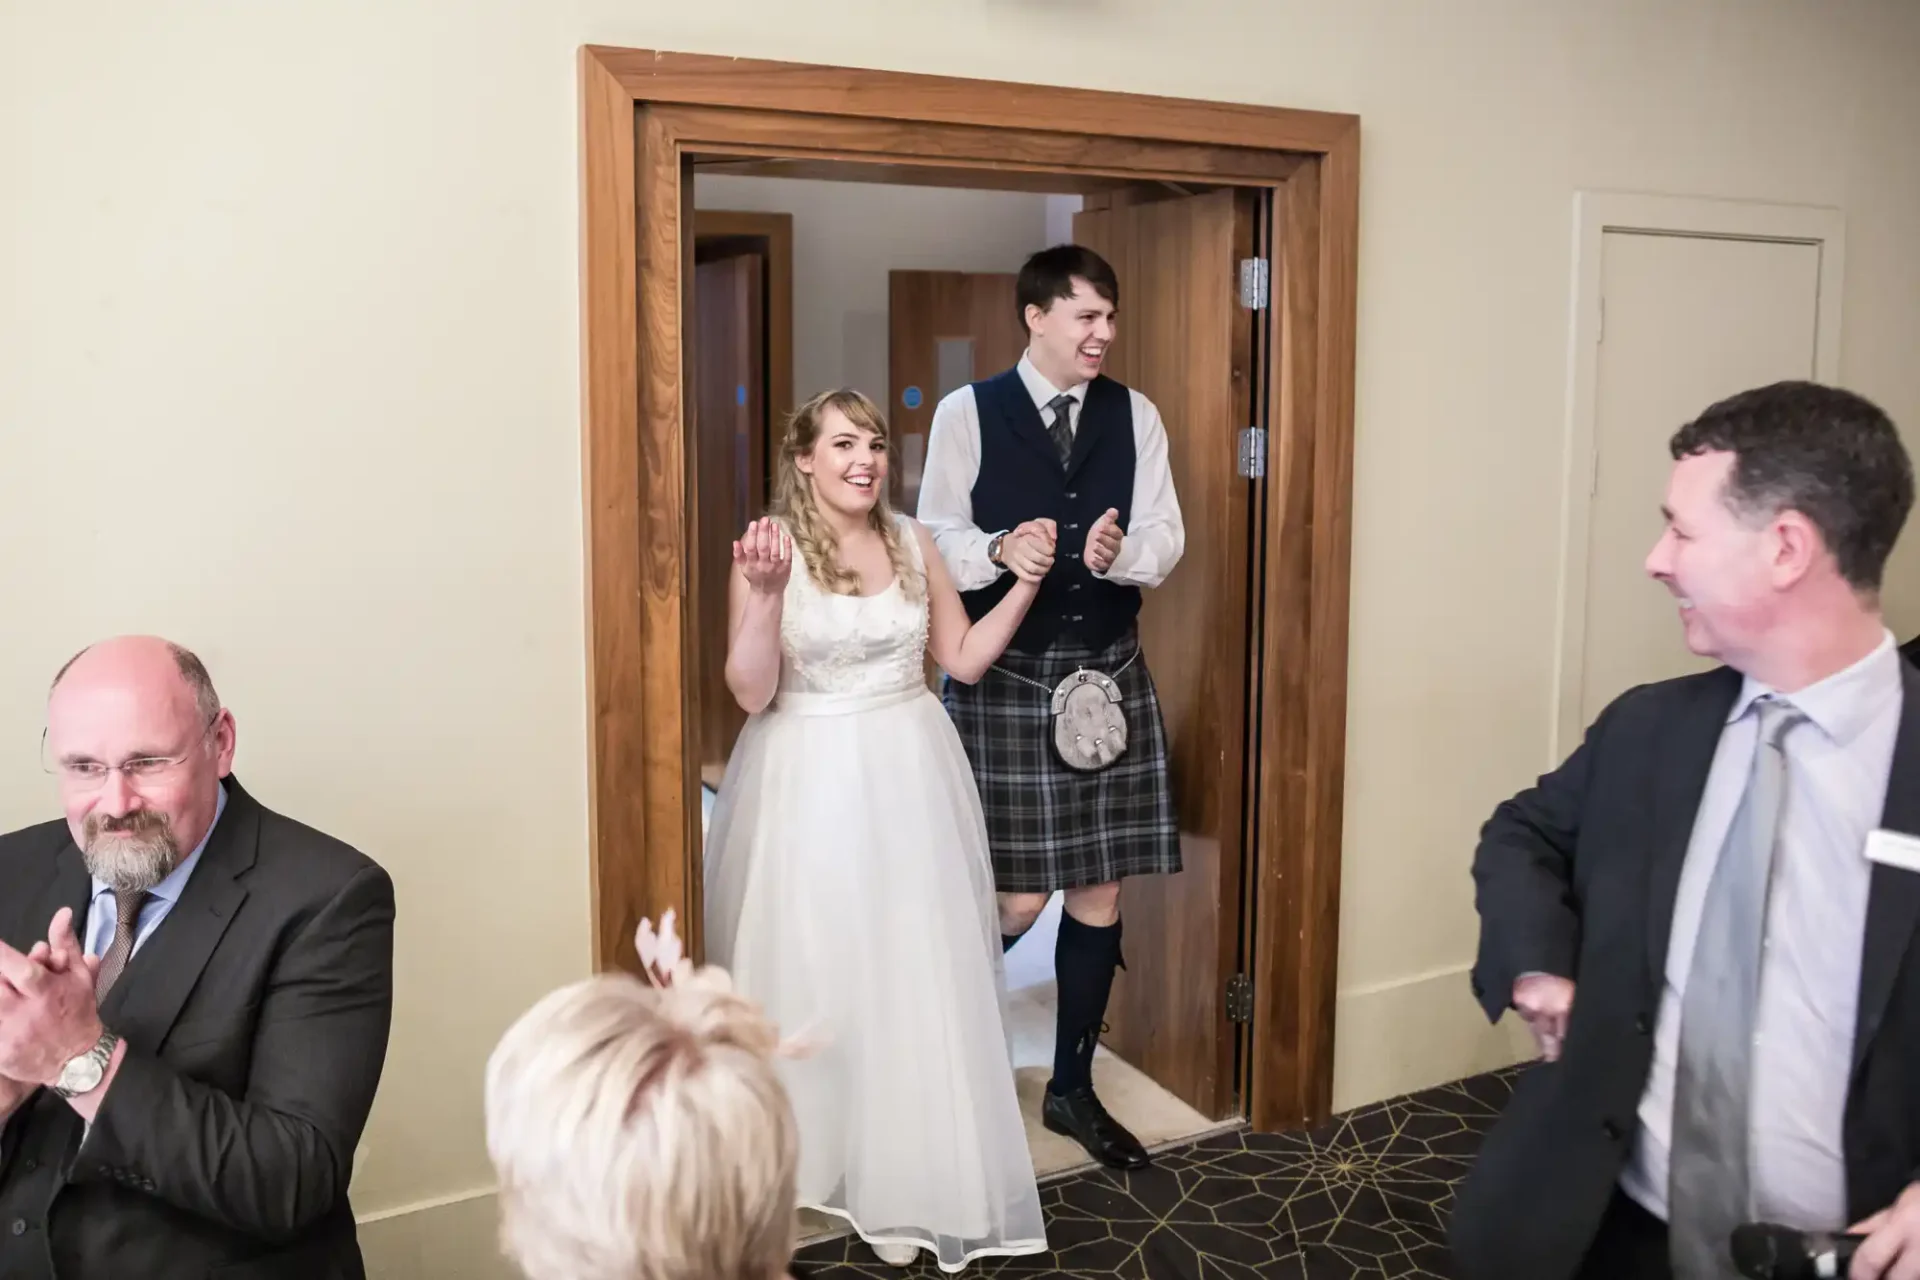 A bride and groom smiling as they enter a room, with guests clapping around them. the groom is wearing a kilt.